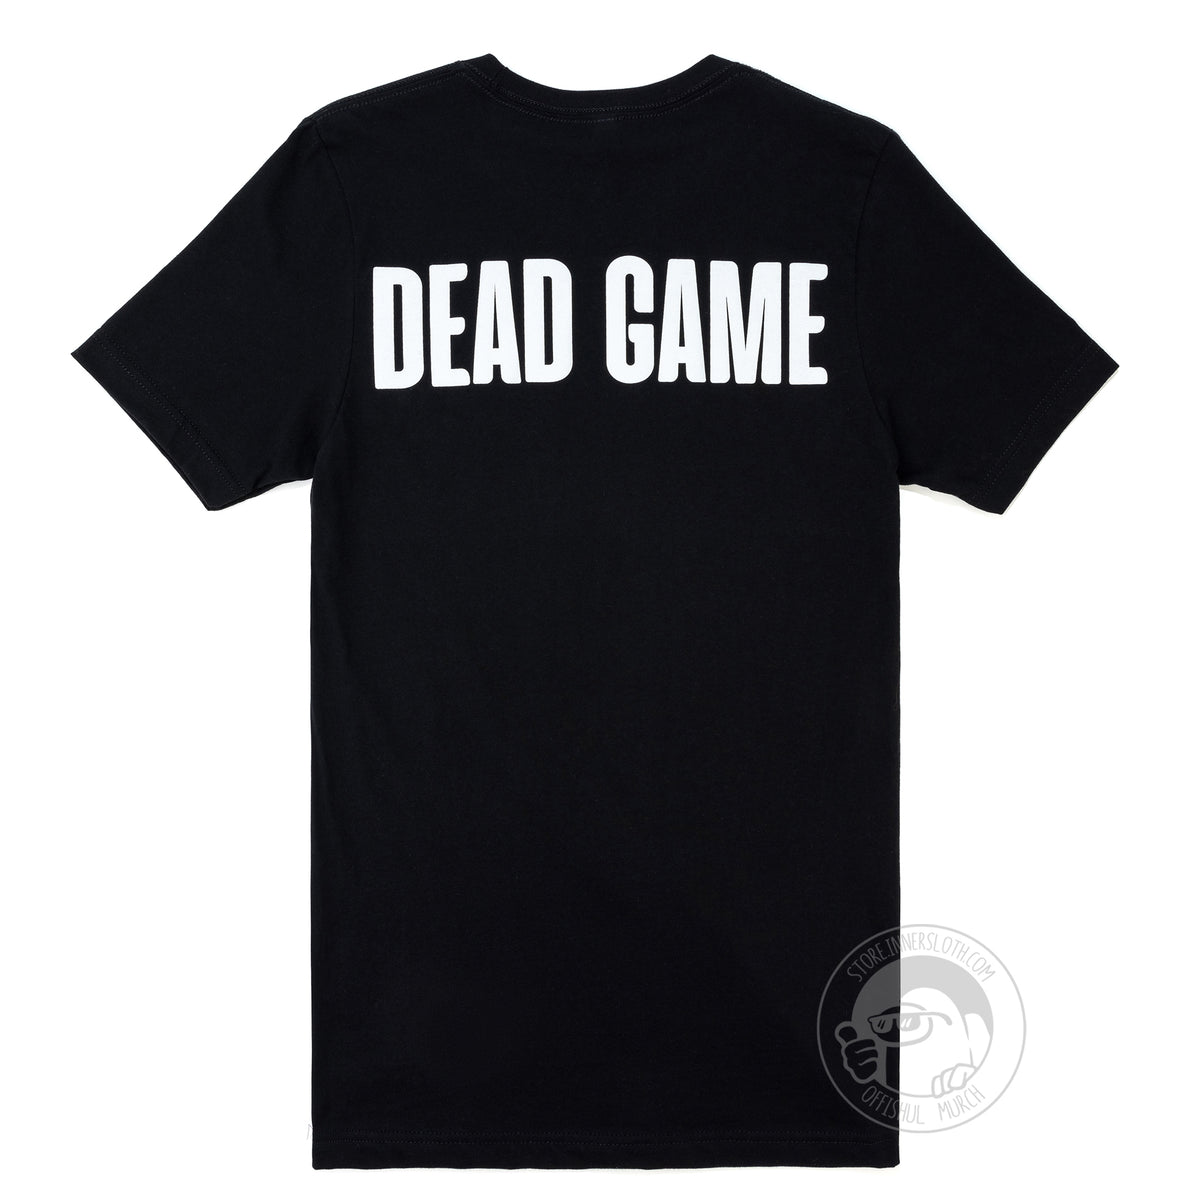 A flat lay photograph of the back of a black t-shirt. The words “DEAD GAME” are printed across the top back in white caps.